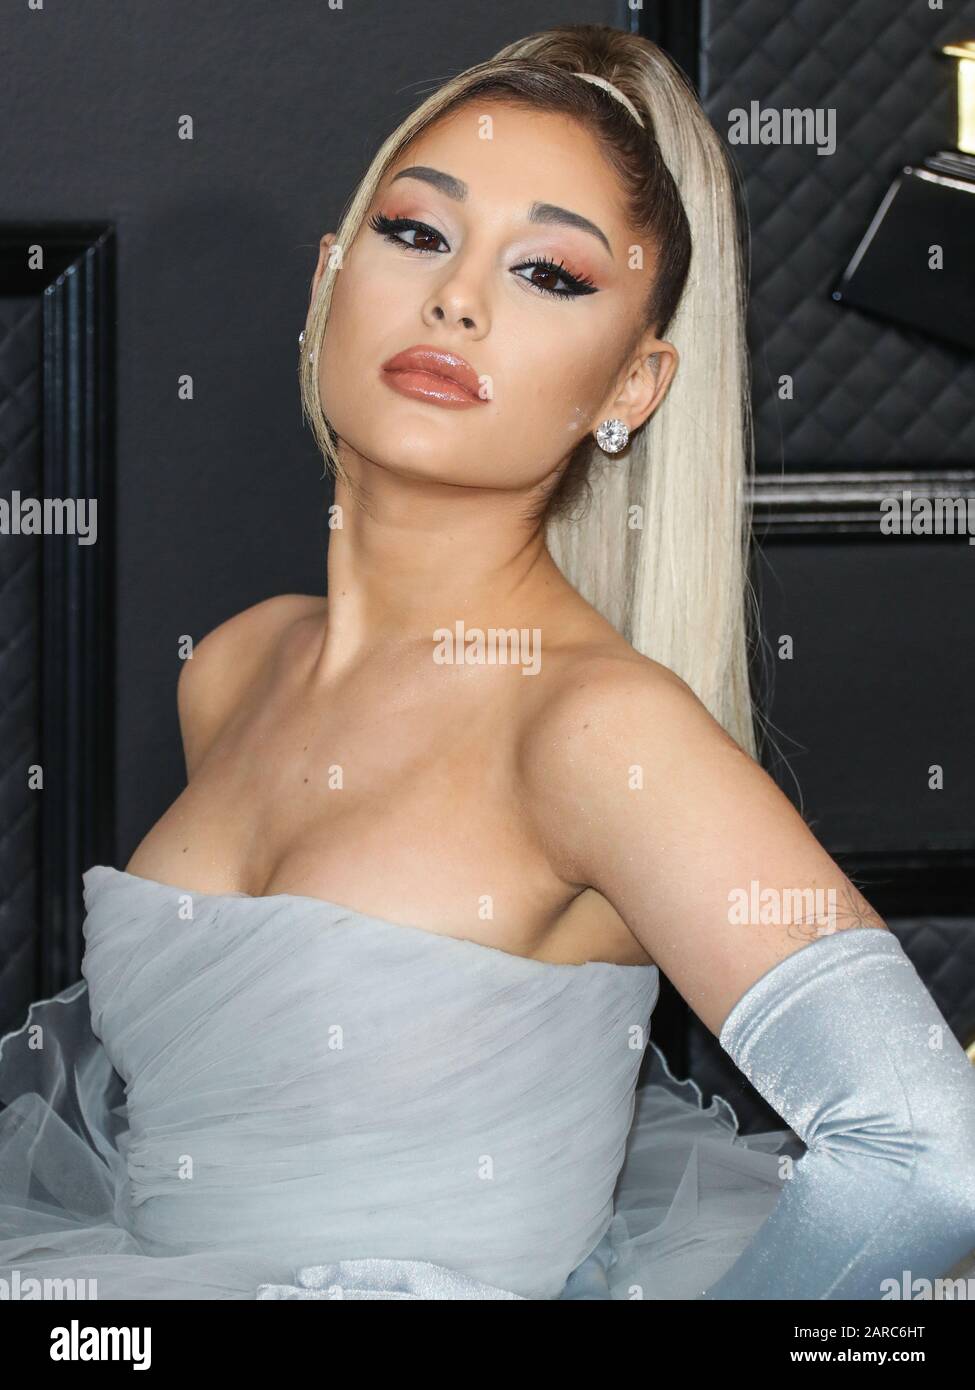 Ariana Grande attends the 57th Annual Grammy Awards at the Staples Center  in Los Angeles, CA, USA, on February 8, 2015. She is wearing a dress by  Versace. Photo by Lionel Hahn/ABACAPRESS.COM